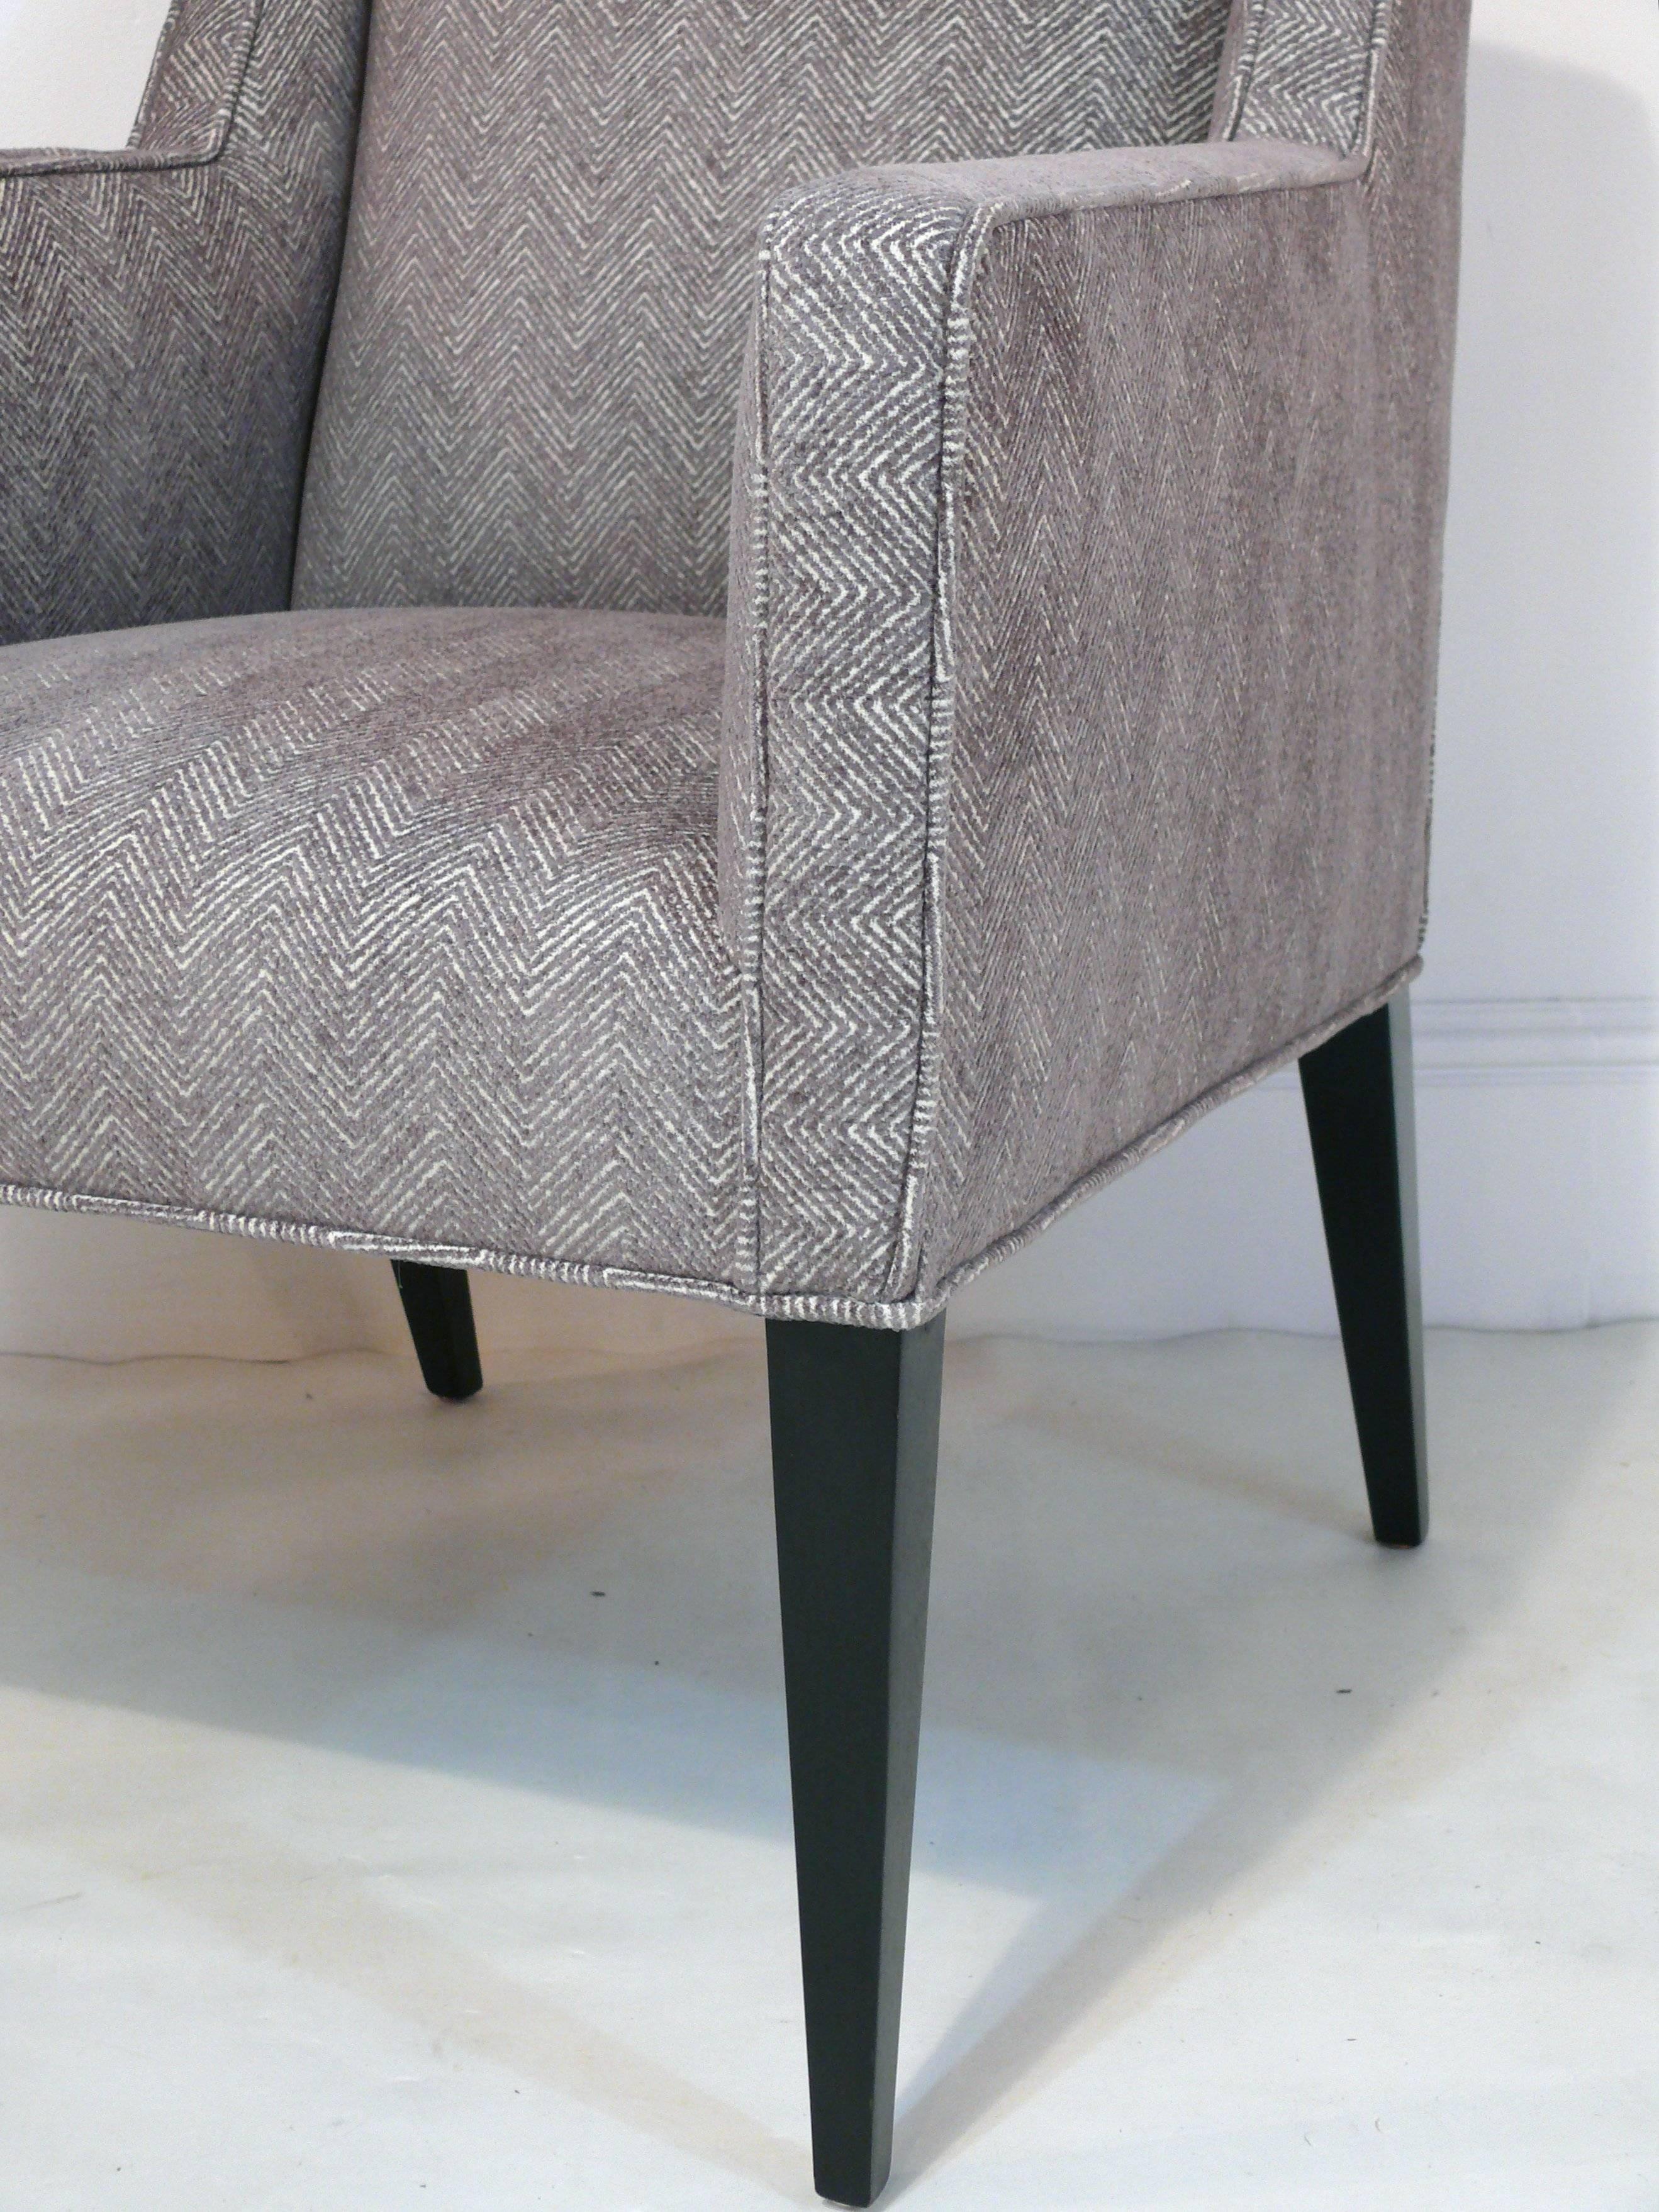 Edward Wormley for Dunbar single club or side chair, makes a great desk chair, upholstered in grey chenile, ebonized legs.